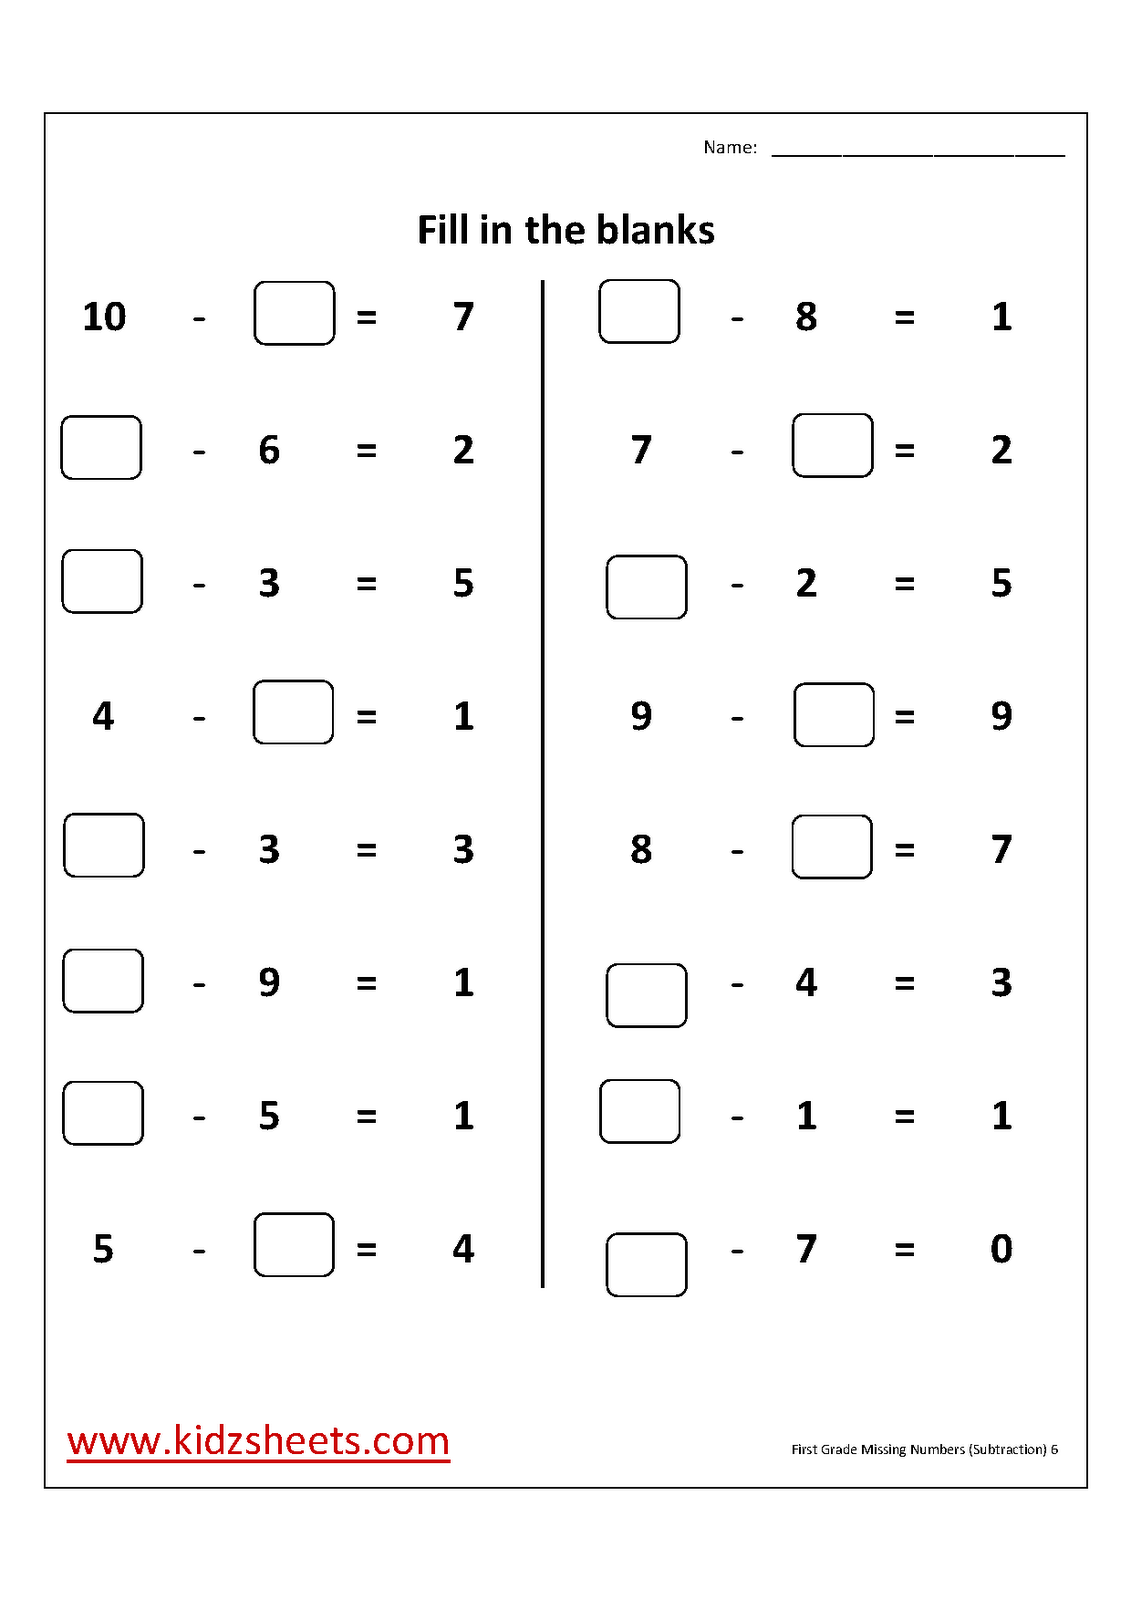 and grade missing numbers For year 1st Subtraction First missing And Grade subtraction number  6 addition Addition